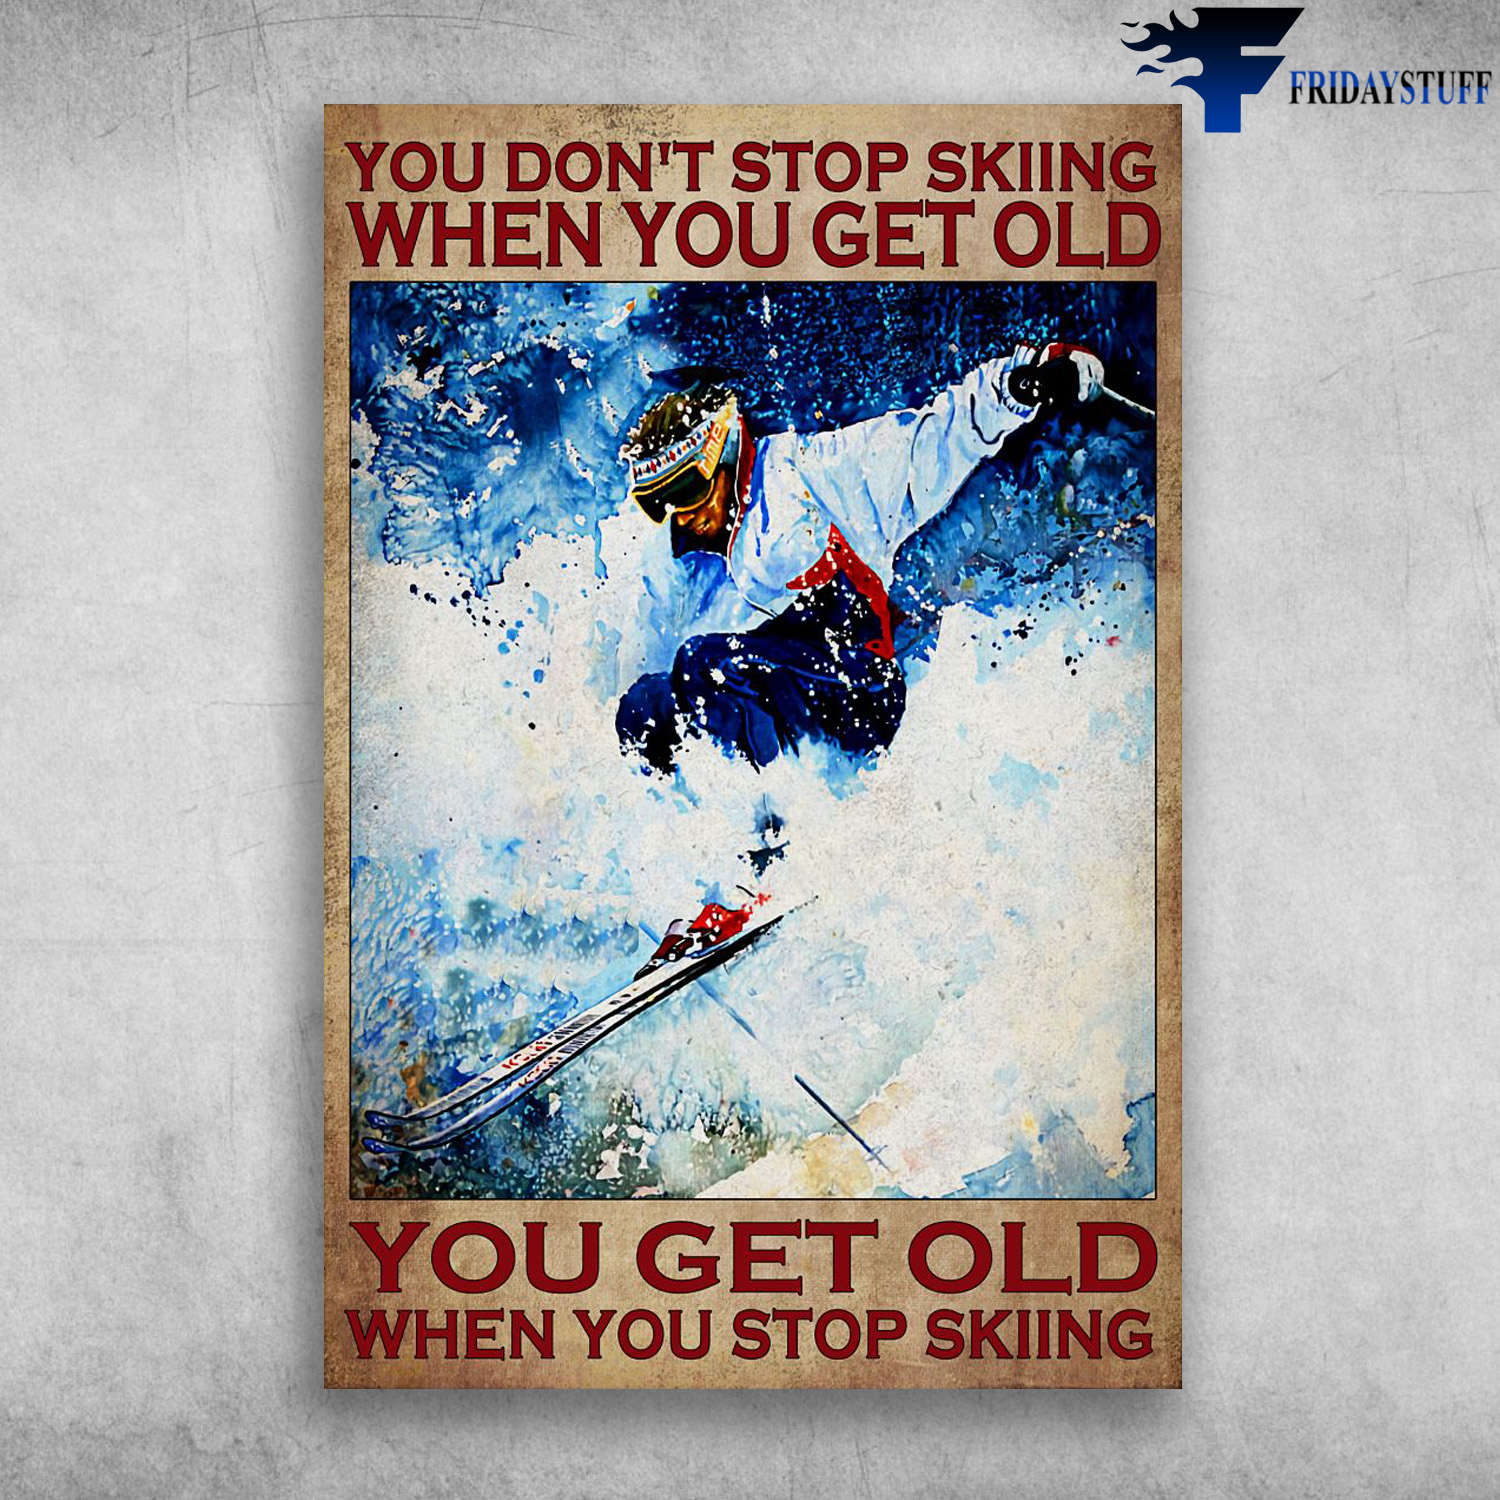 Man Skiing - You Don't Stop Skiing When You Get Old, You Get Old When You Stop Skiing